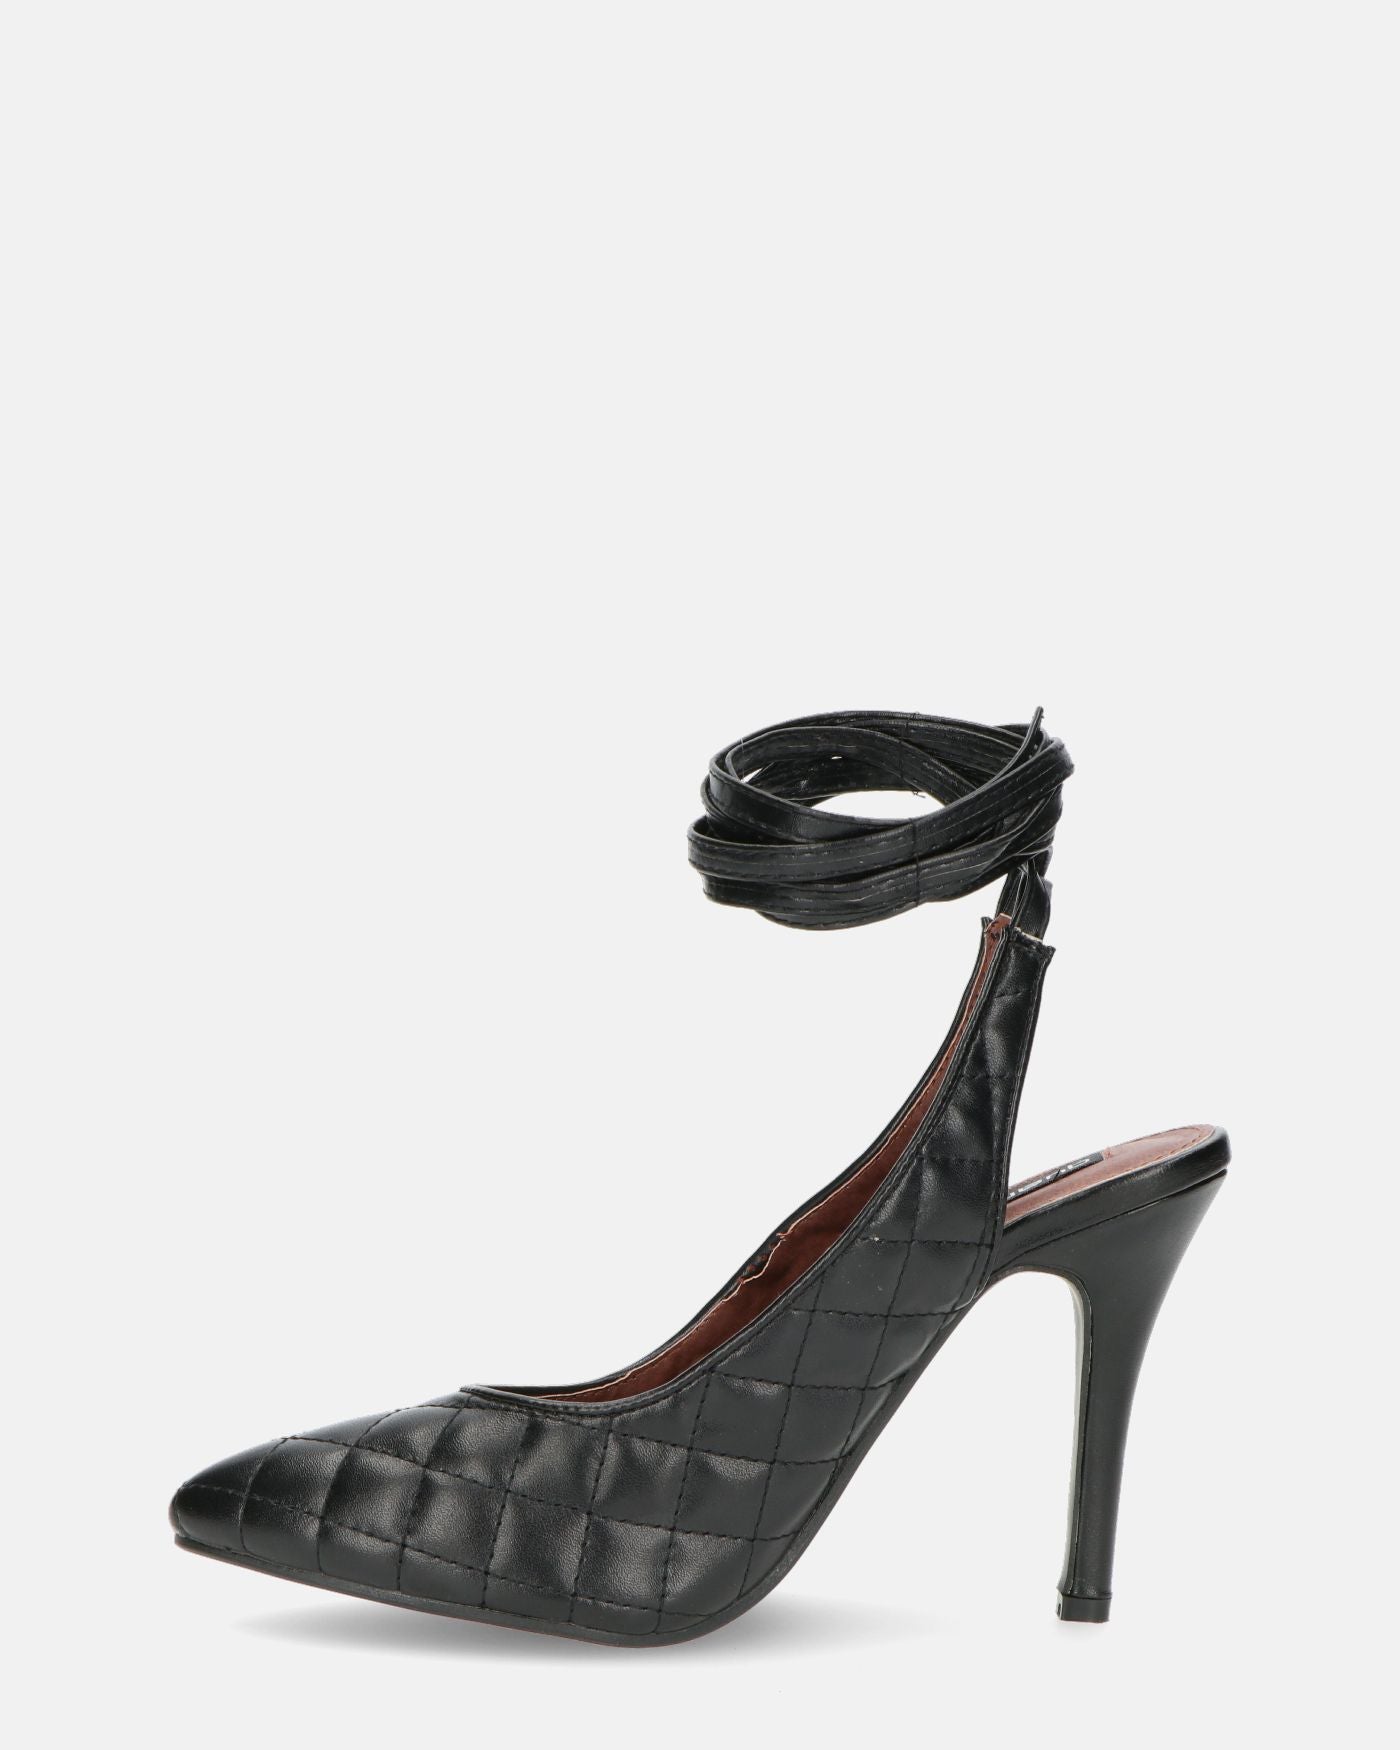 SUZIE - stiletto heel in black with laces and padded PU